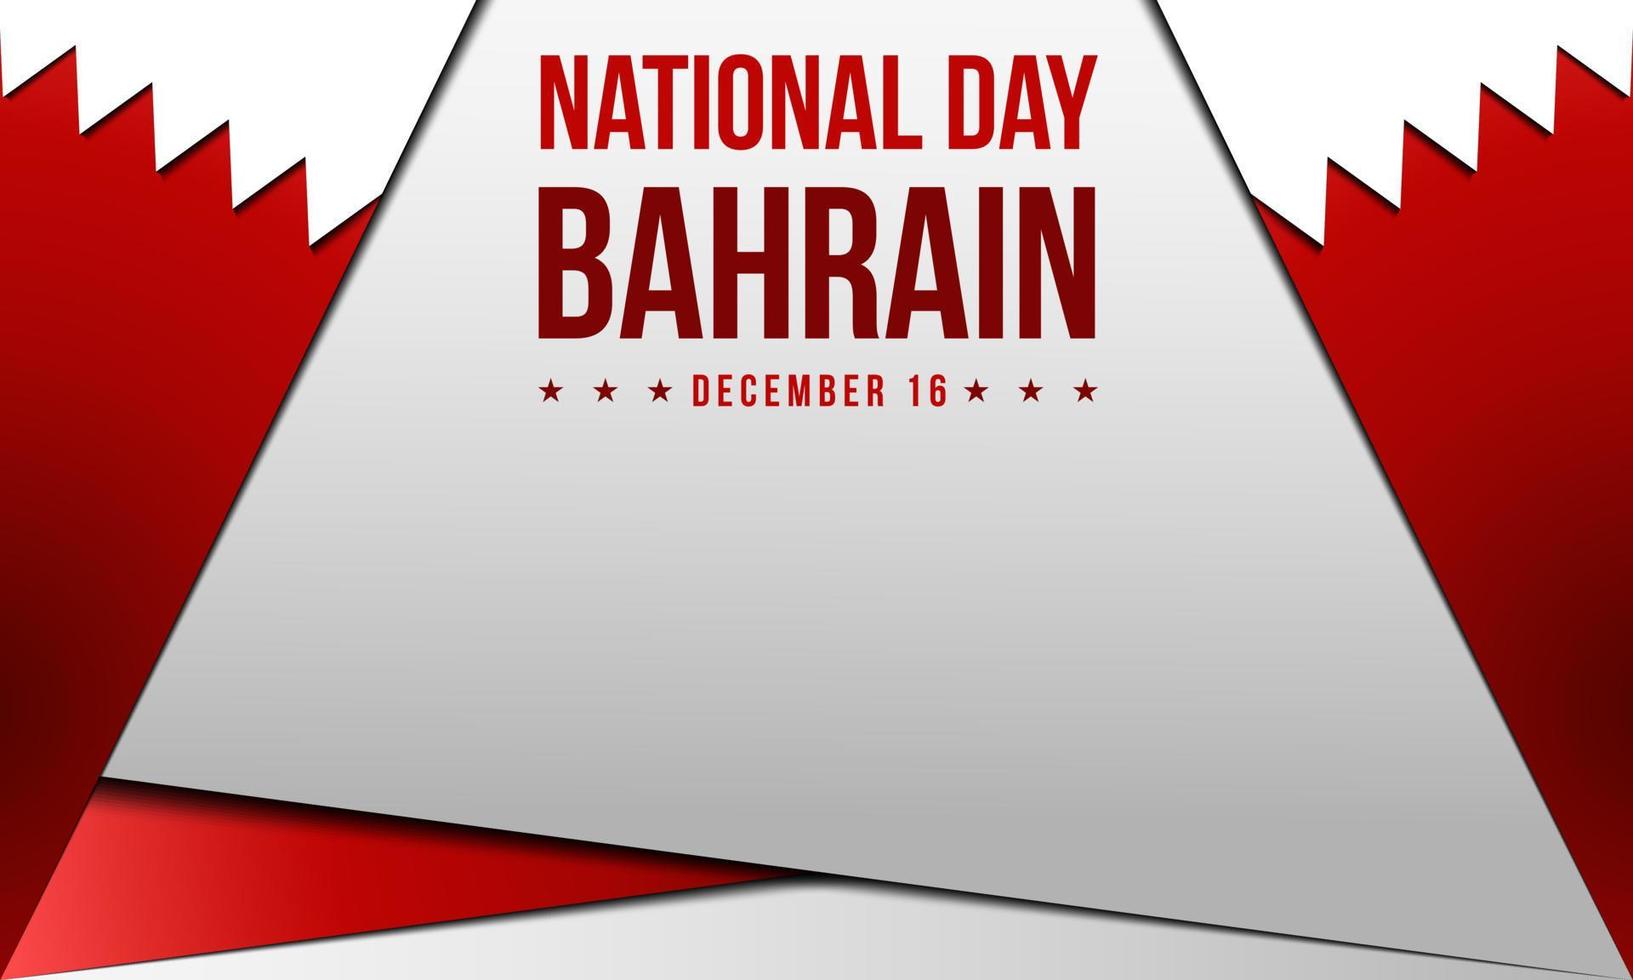 Bahrain National Day Background. December 16. Template for banner, greeting card, or poster. With Bahrain national flag. Premium vector illustration